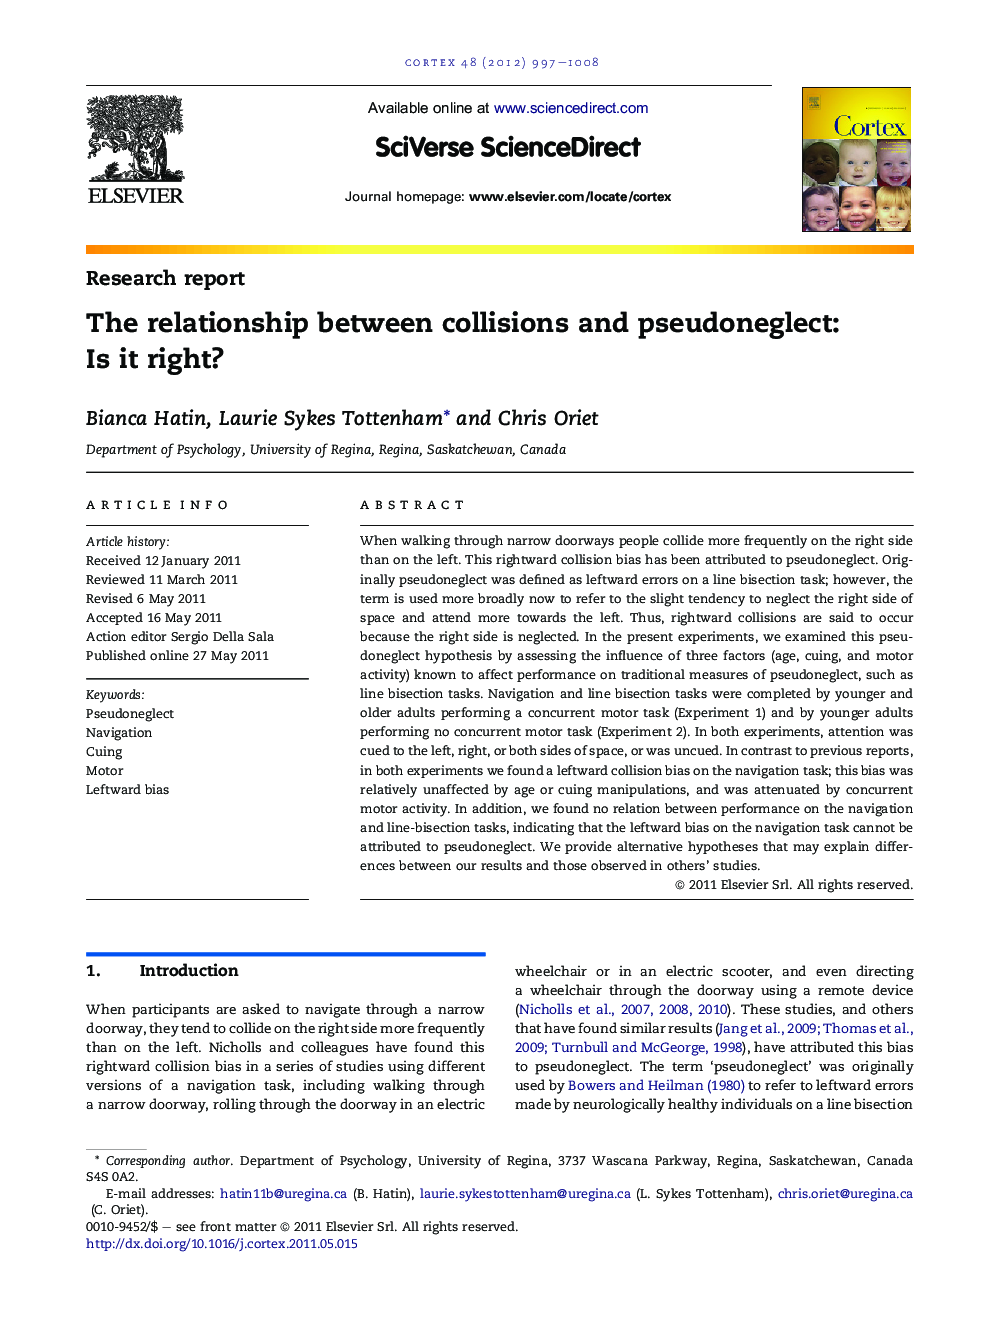 The relationship between collisions and pseudoneglect: Is it right?